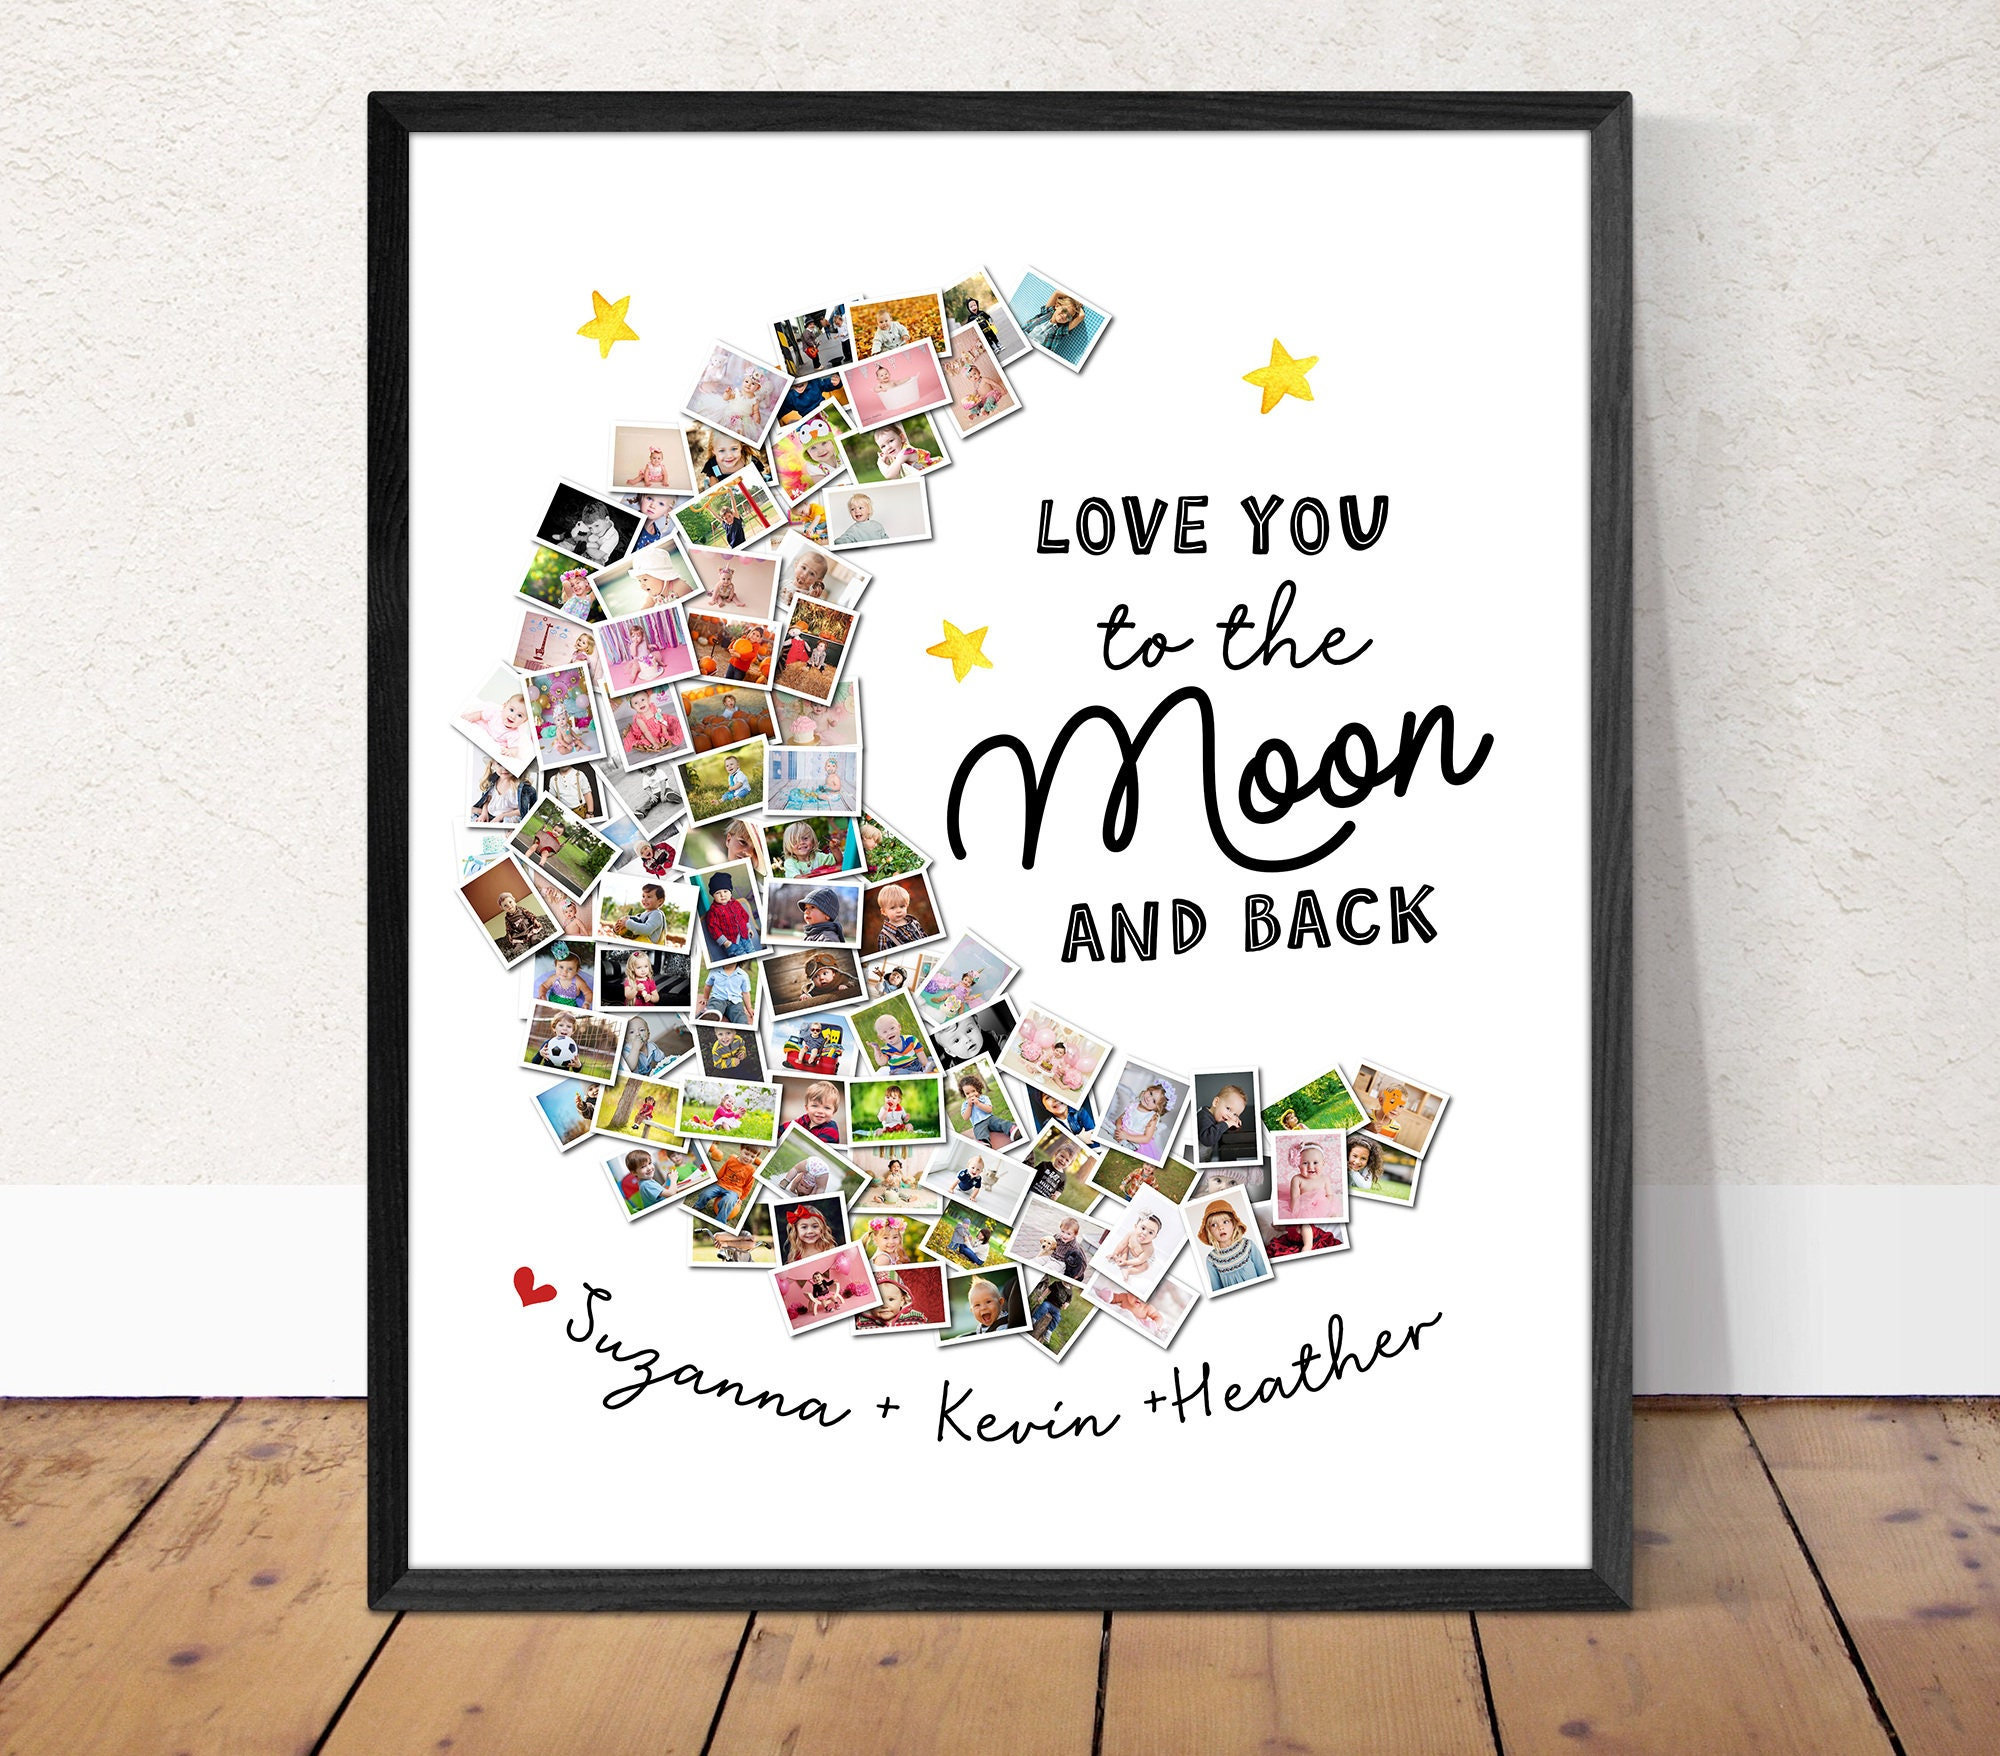 To The Moon & Back Linen Photo Frame 6”x6 – Sugarboo & Co